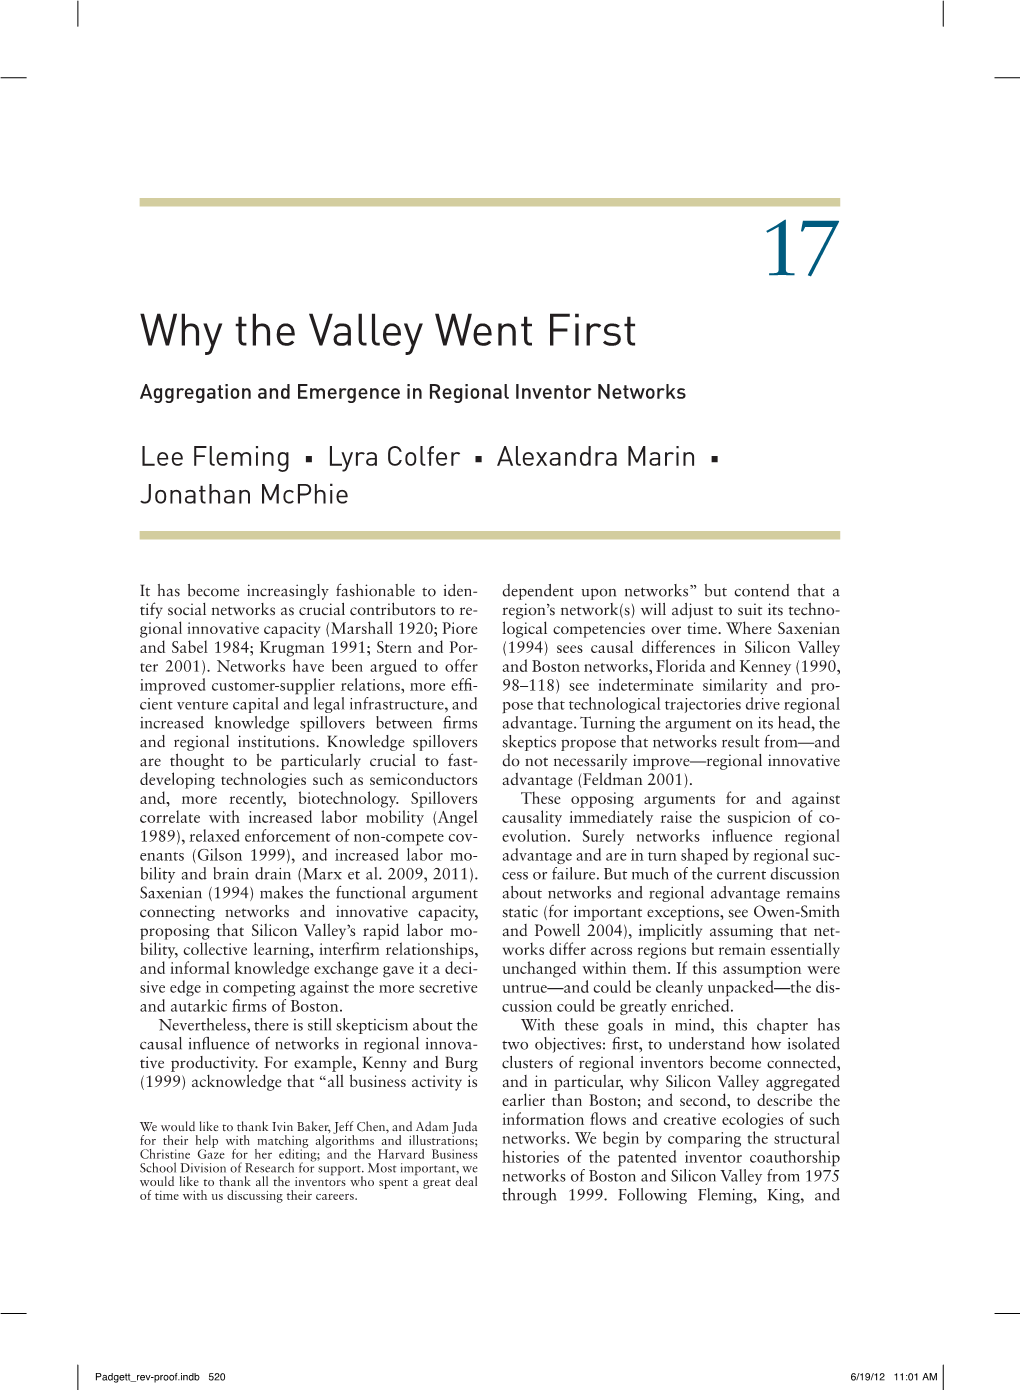 Why the Valley Went First